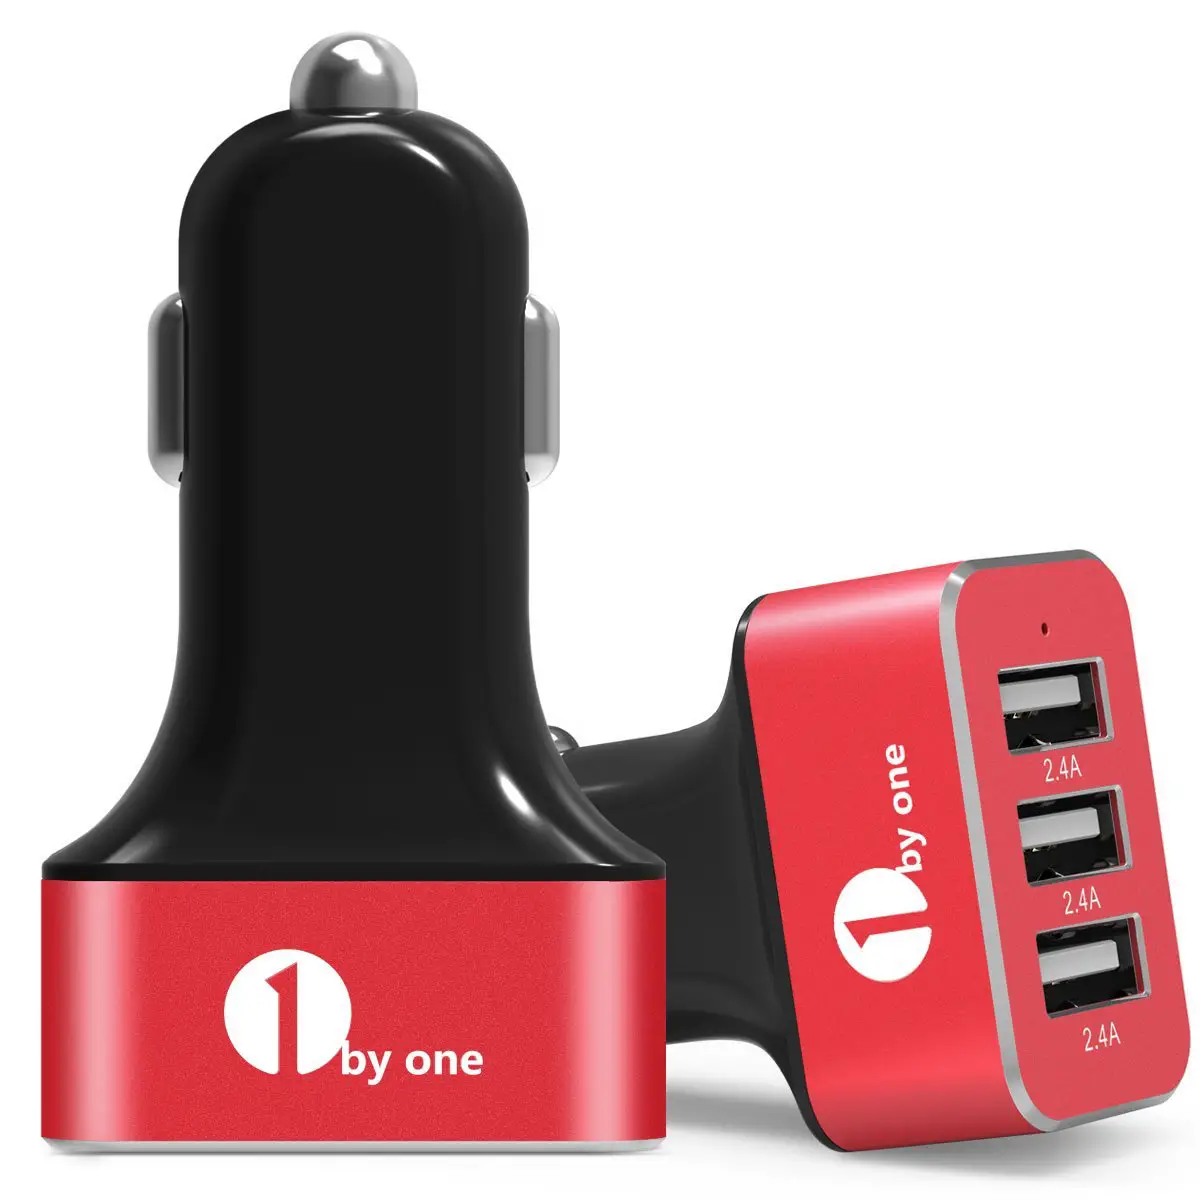 1byone 7.2A/36W Car Charger, Triple 3 USB Port[Smart Port], Smart Sense IC Adapts to All Device Default Charger Rate